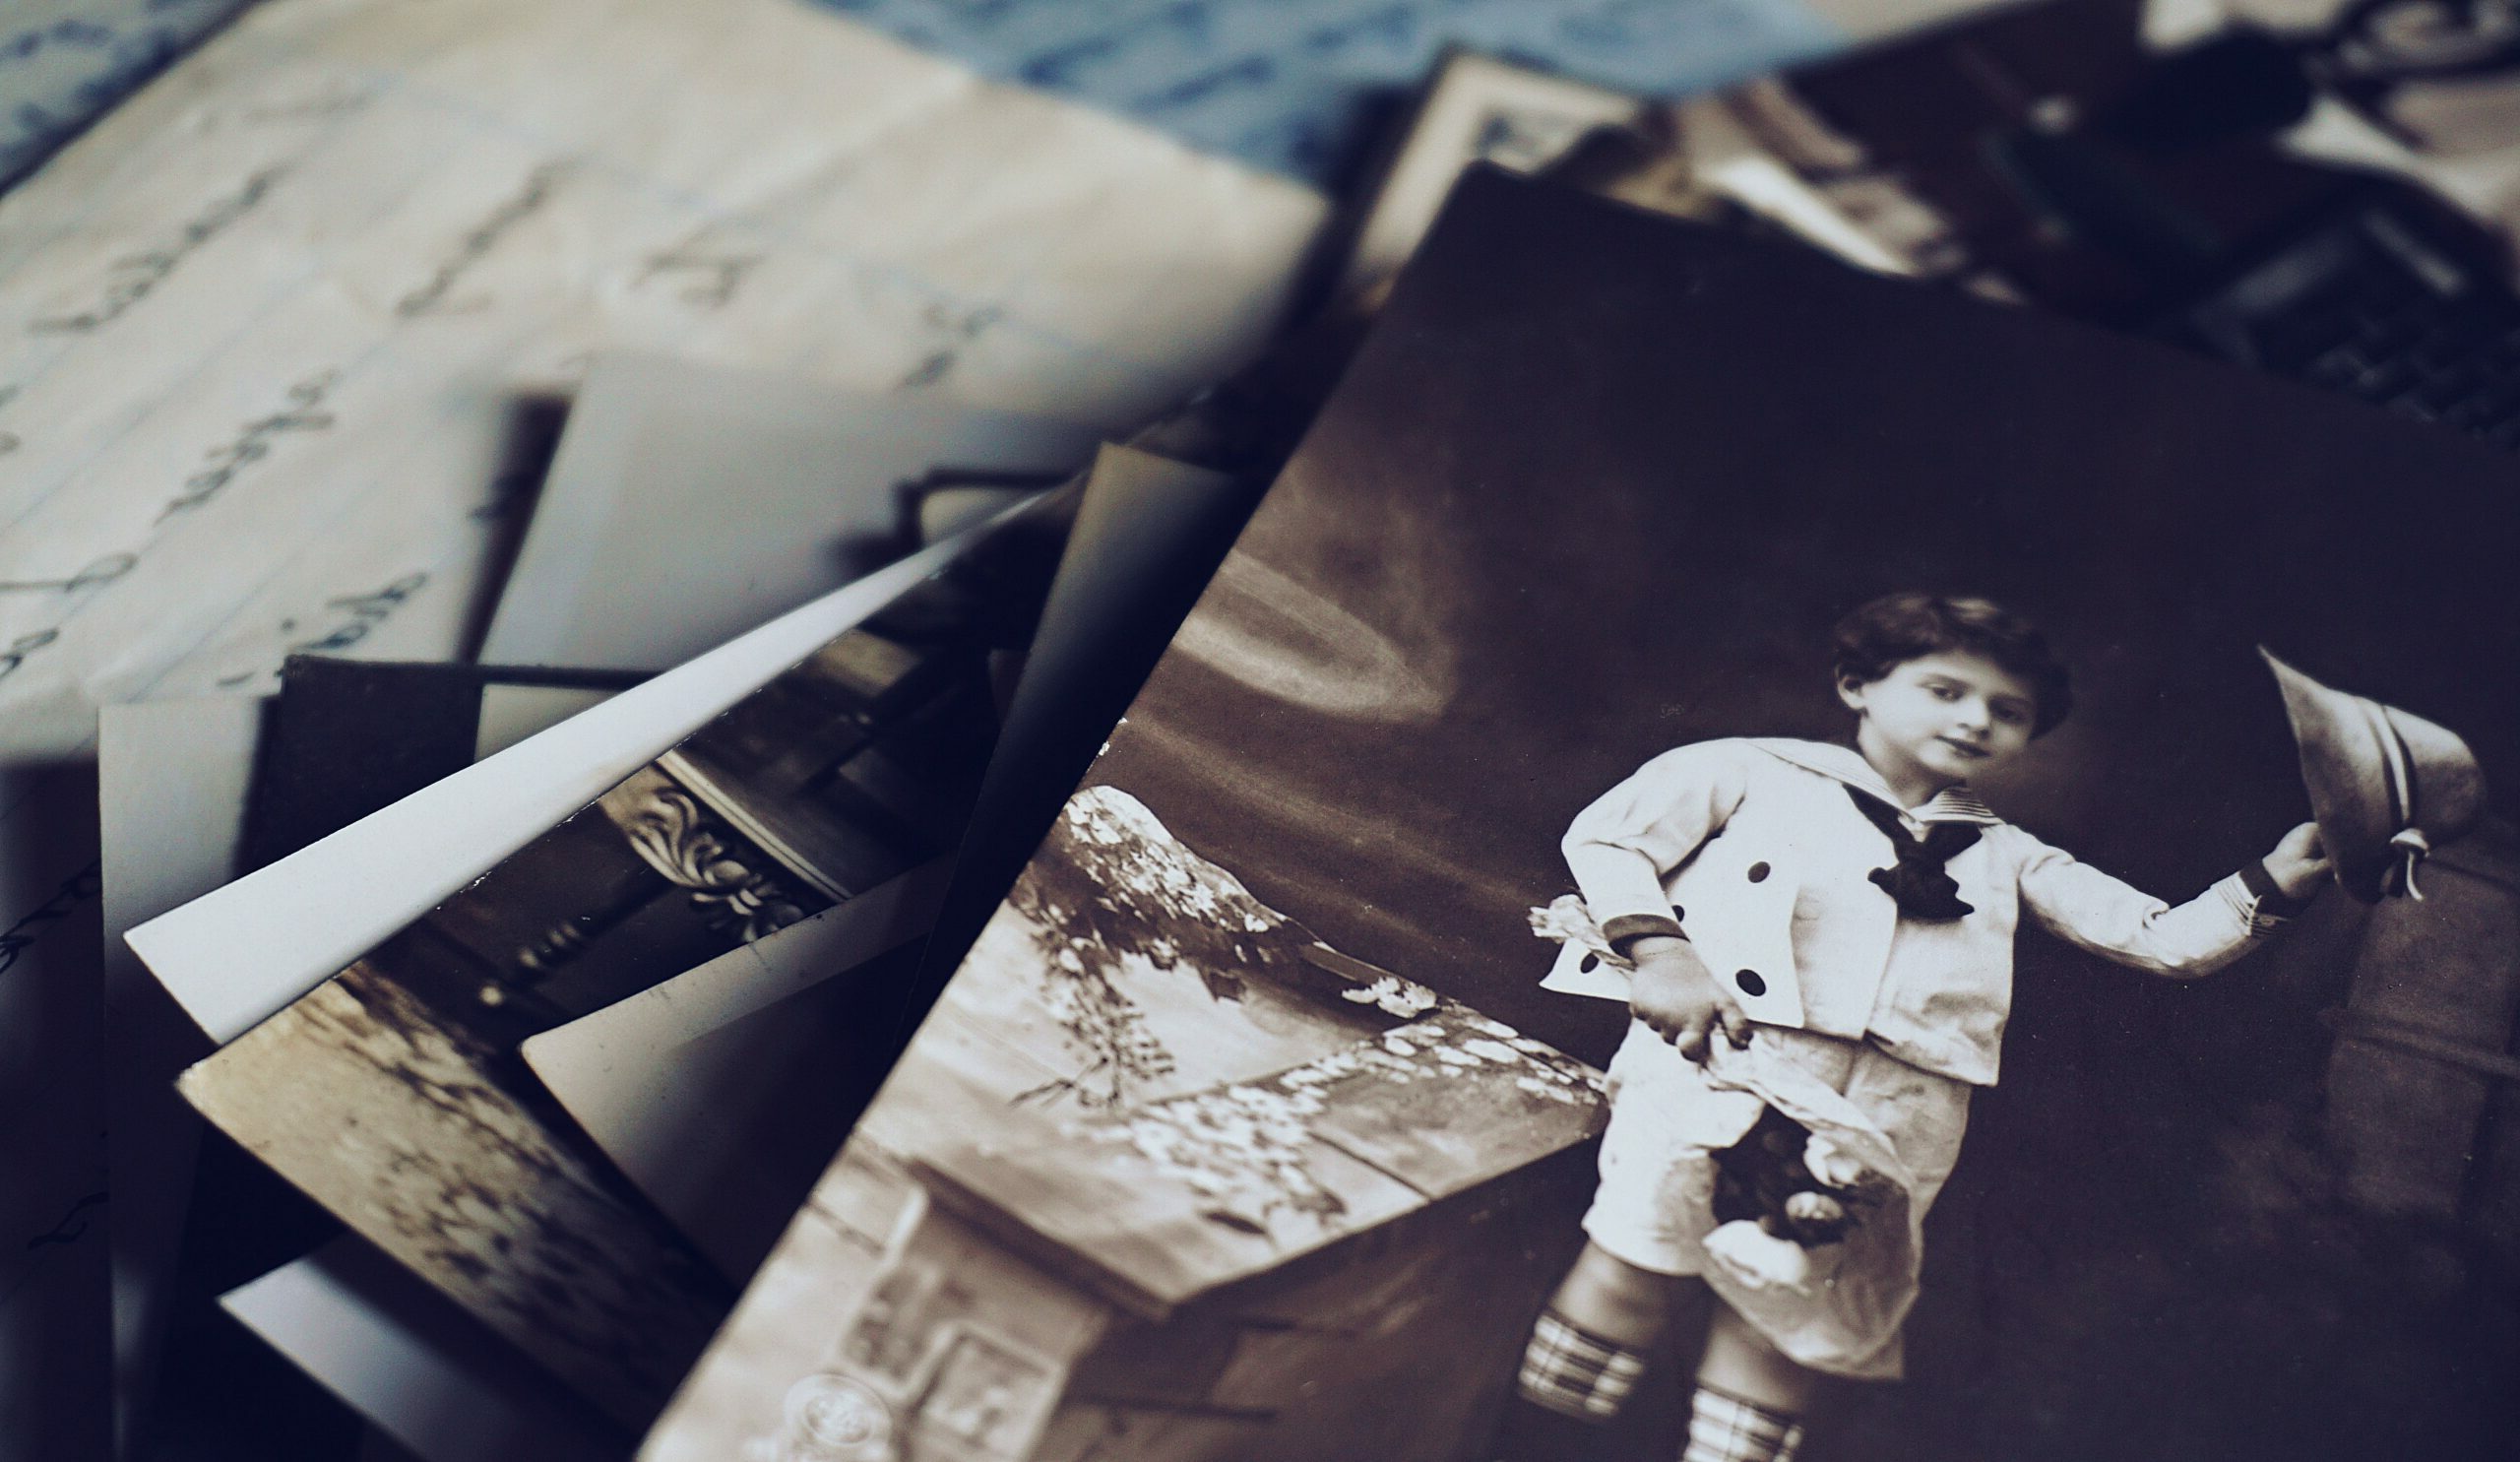 Find your family history, discover yourself